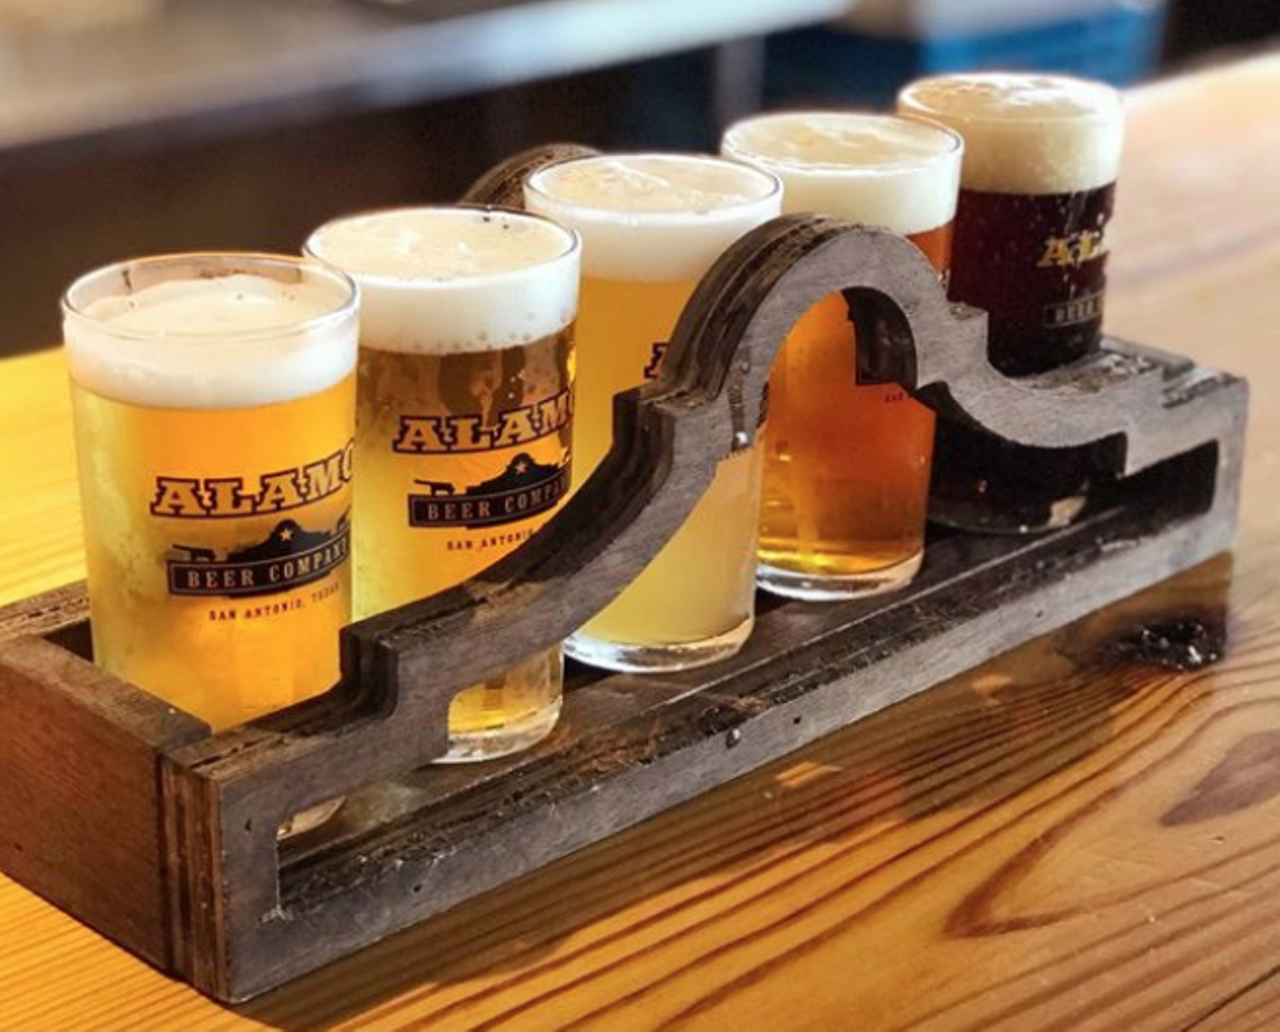 The ever-expanding lineup of beers all began with an American blonde ale known as Alamo Golden Ale. The beer hall sits just under the Hays Street Bridge on the city’s Eastside.
Photo via Instagram / mrrwb